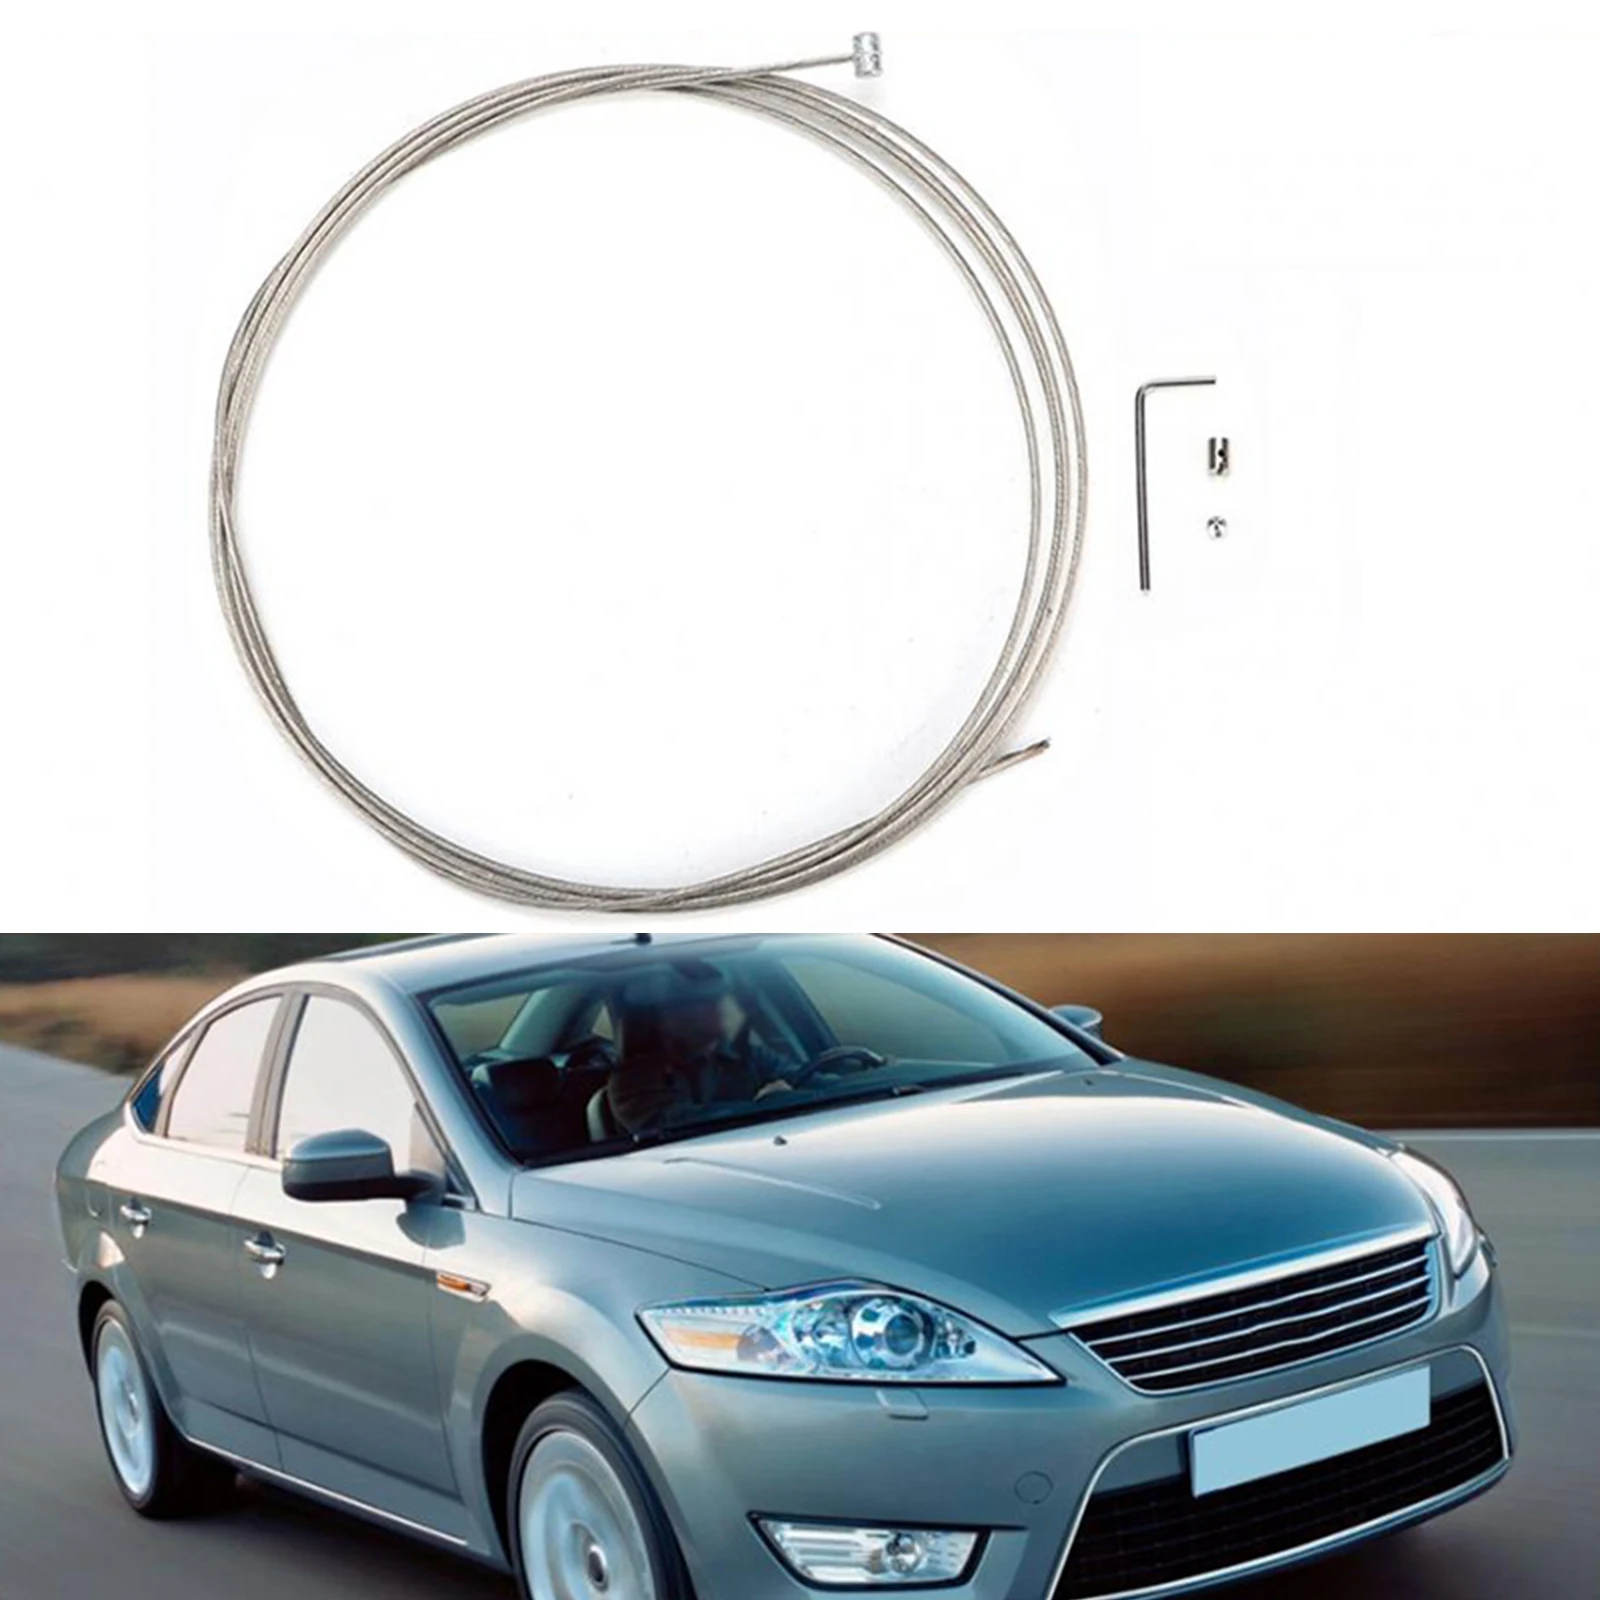 8.2ft Car Handbrake Broken Snapped Bonnet Release Cable Fix fits for Ford Mondeo MK4 2007+